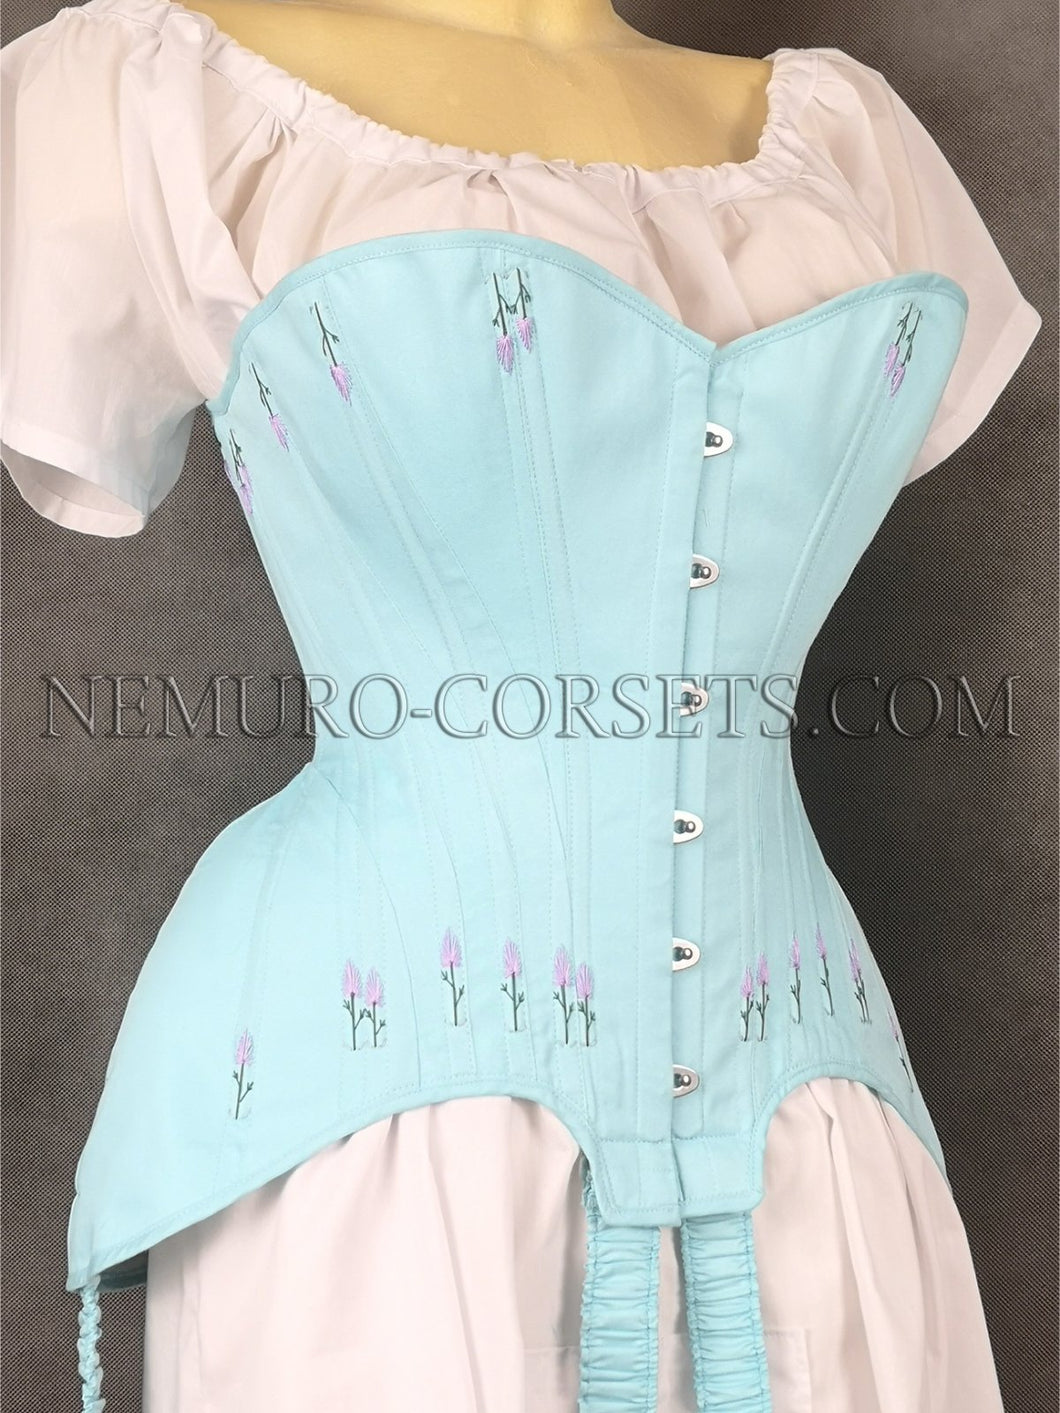 Custom Edwardian 1900s Corset, S Bend Corset Made to Measure, Gibson Girl  Style, Midbust Fit Shipped From the EU 